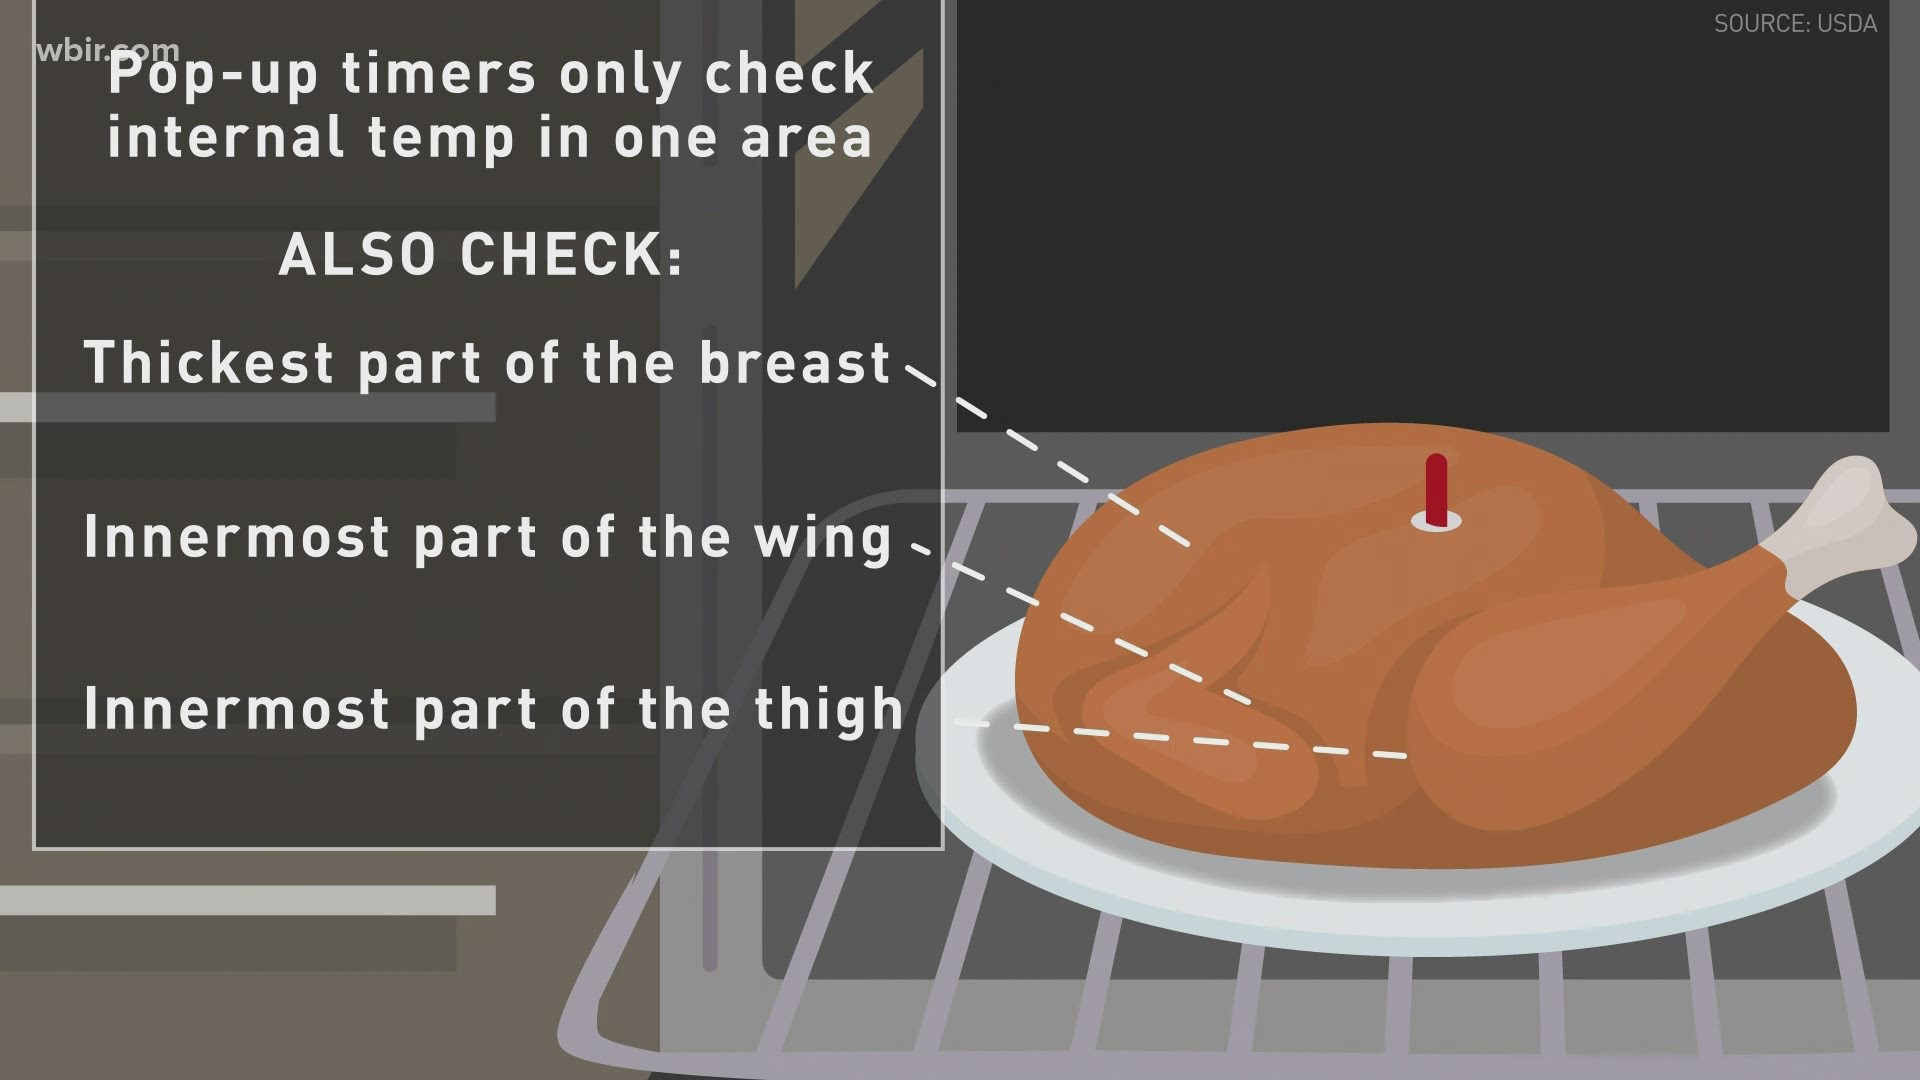 If you're frying your turkey this Thanksgiving, -  firefighters say to do it outdoors on a sturdy, level surface to stay safe.